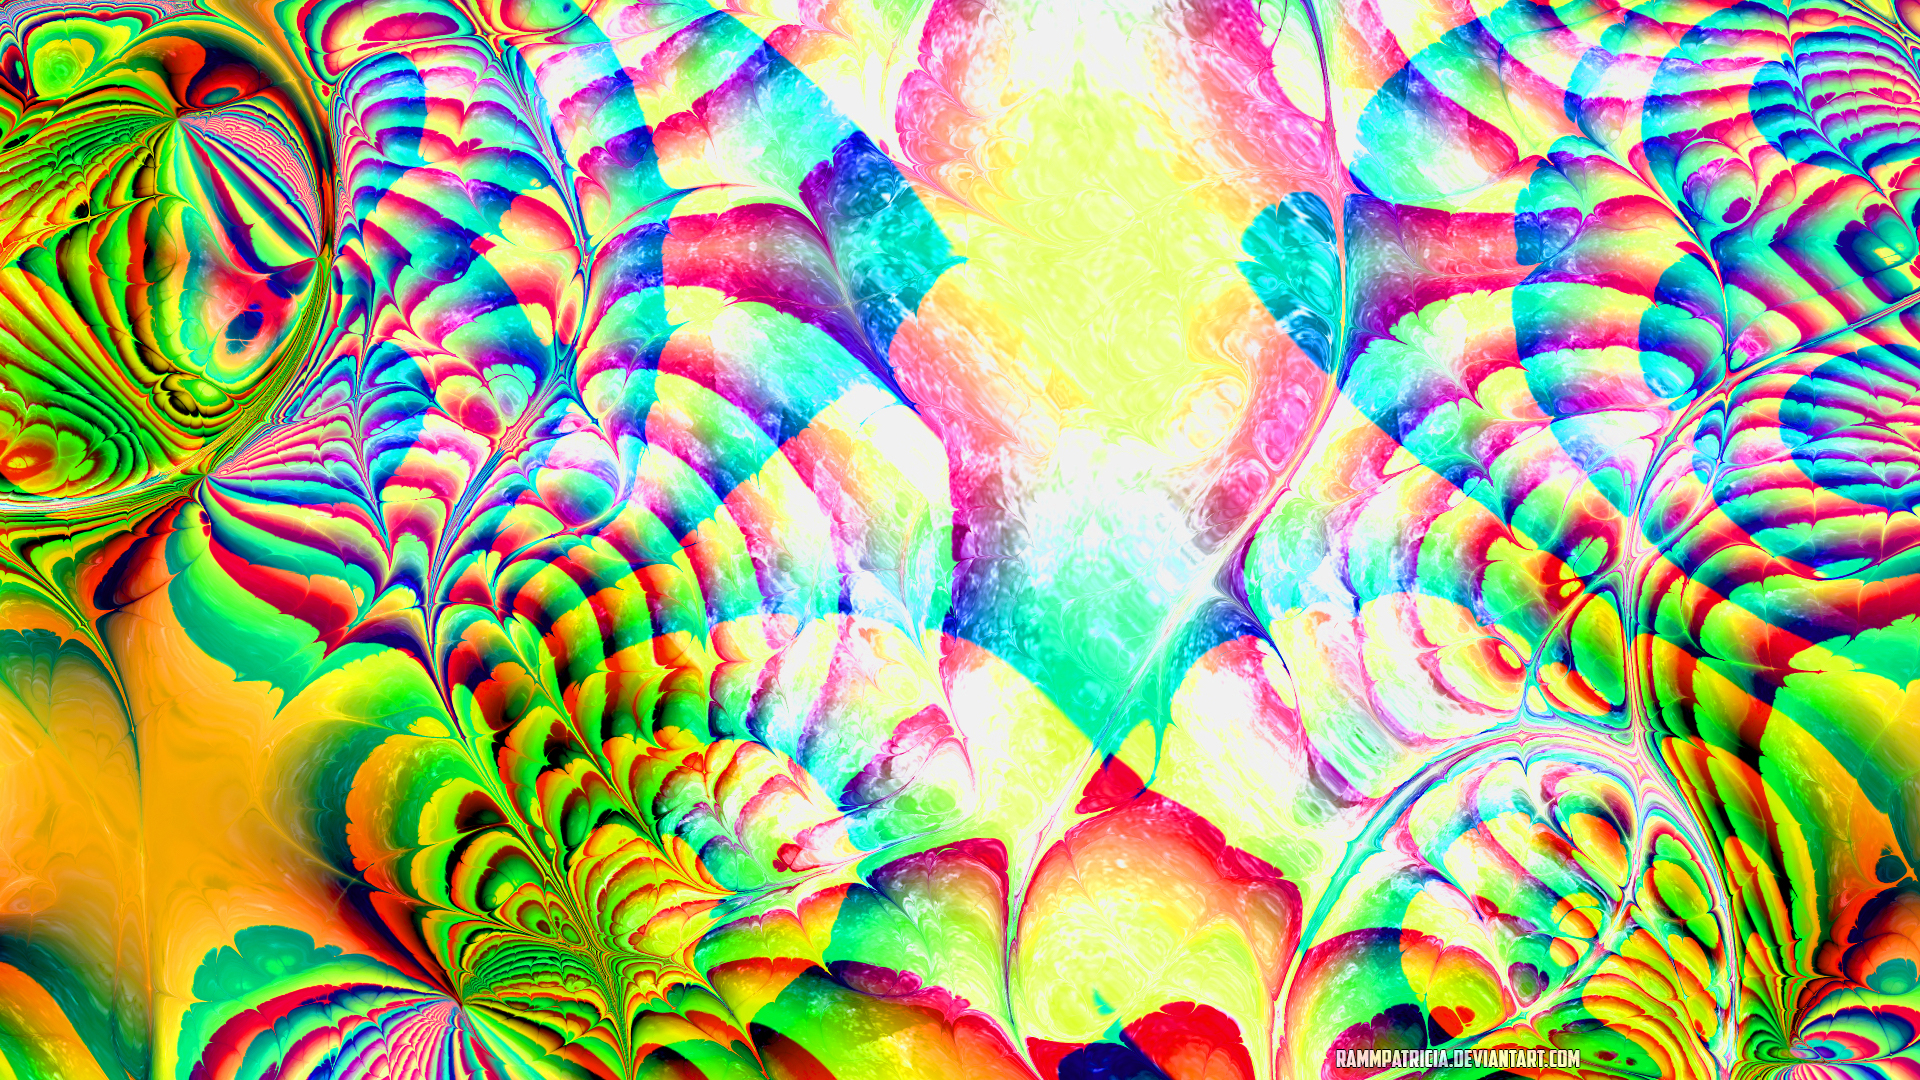 General 1920x1080 RammPatricia abstract digital art colorful psychedelic